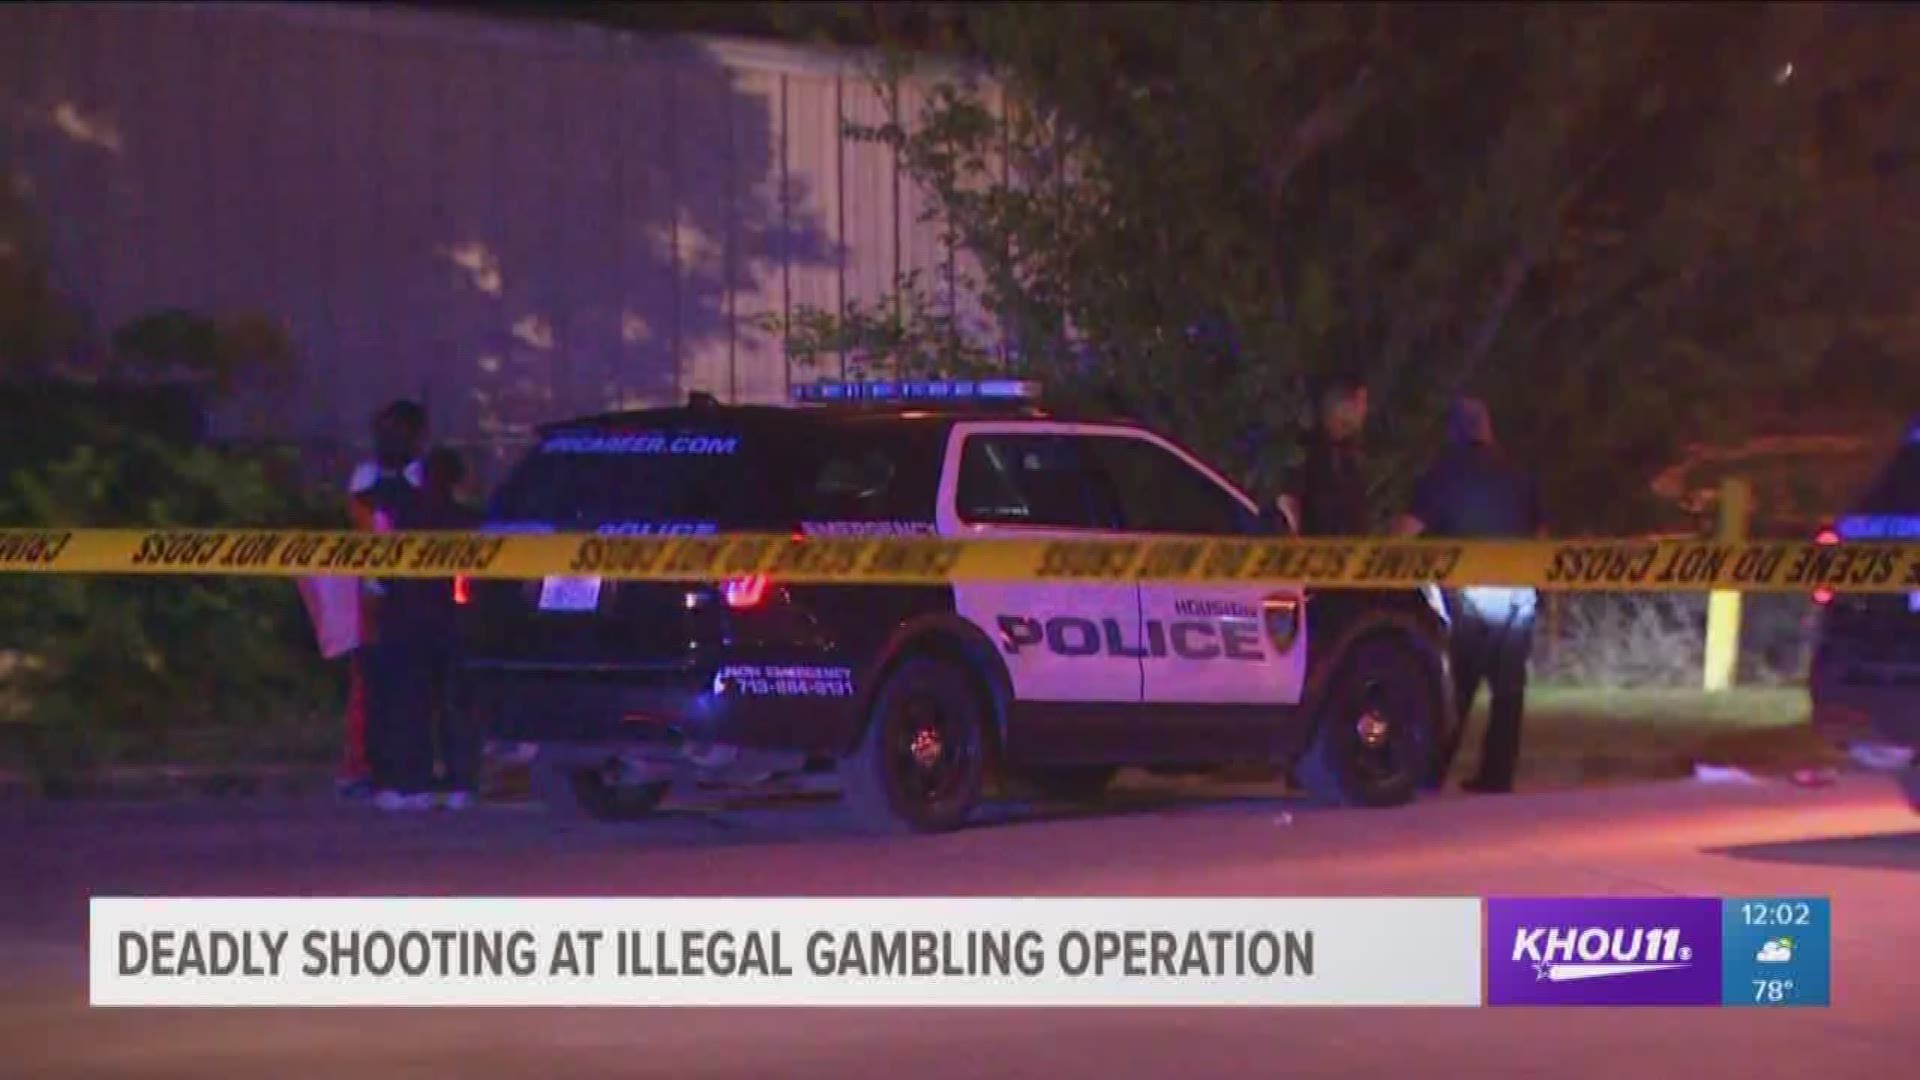 Two men were shot and killed overnight in a north Houston warehouse. HPD detectives say the warehouse was the scene of an illegal gambling operation. They're looking at robbery as a possible motive.